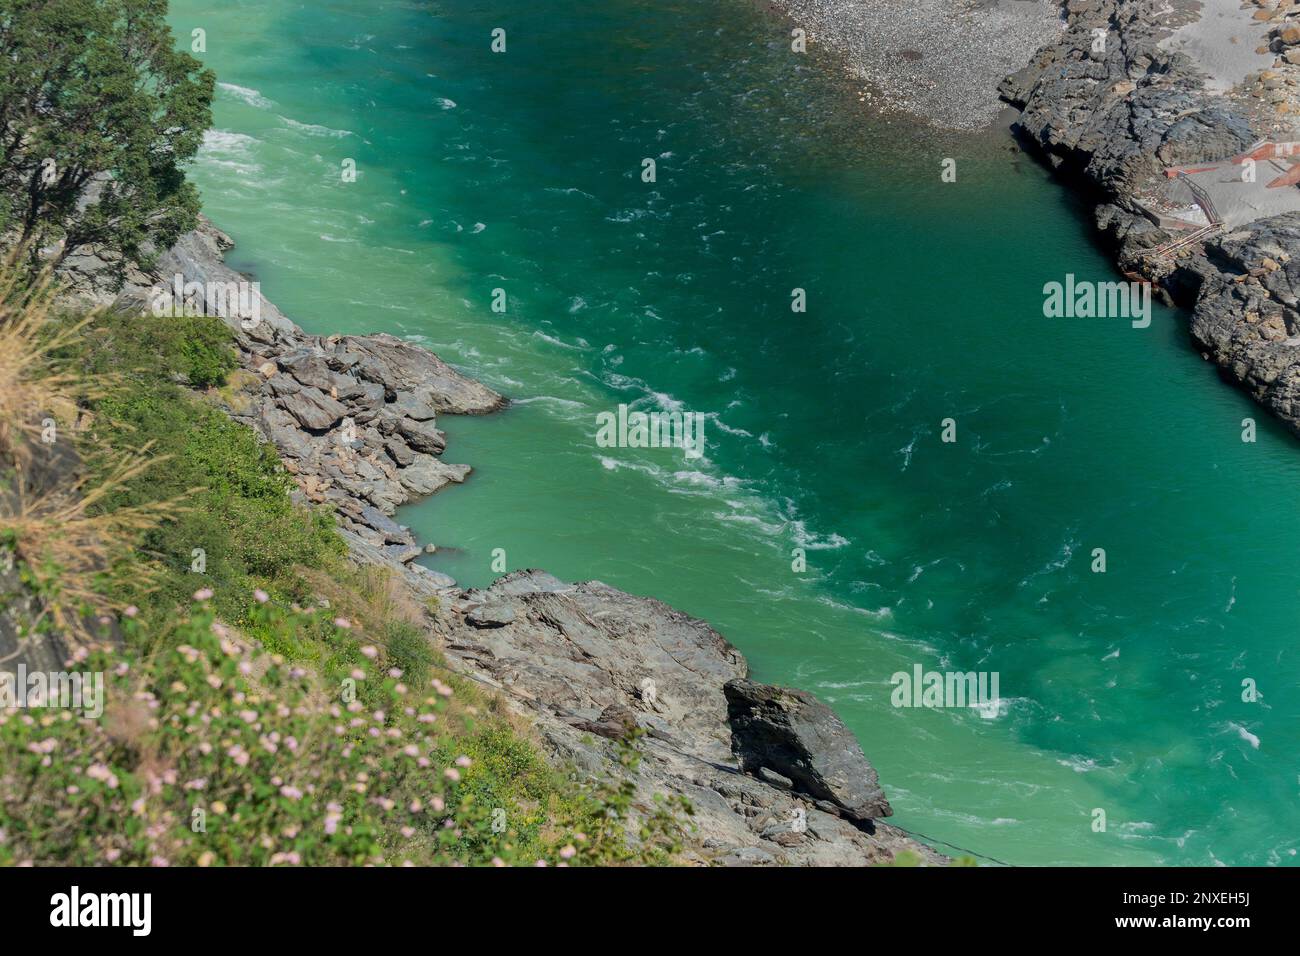 Bhagirathi river from left side and Alakananda river with turquoise blue colour from right side converge at Devprayag,Holy conflunece,Himalays, India. Stock Photo